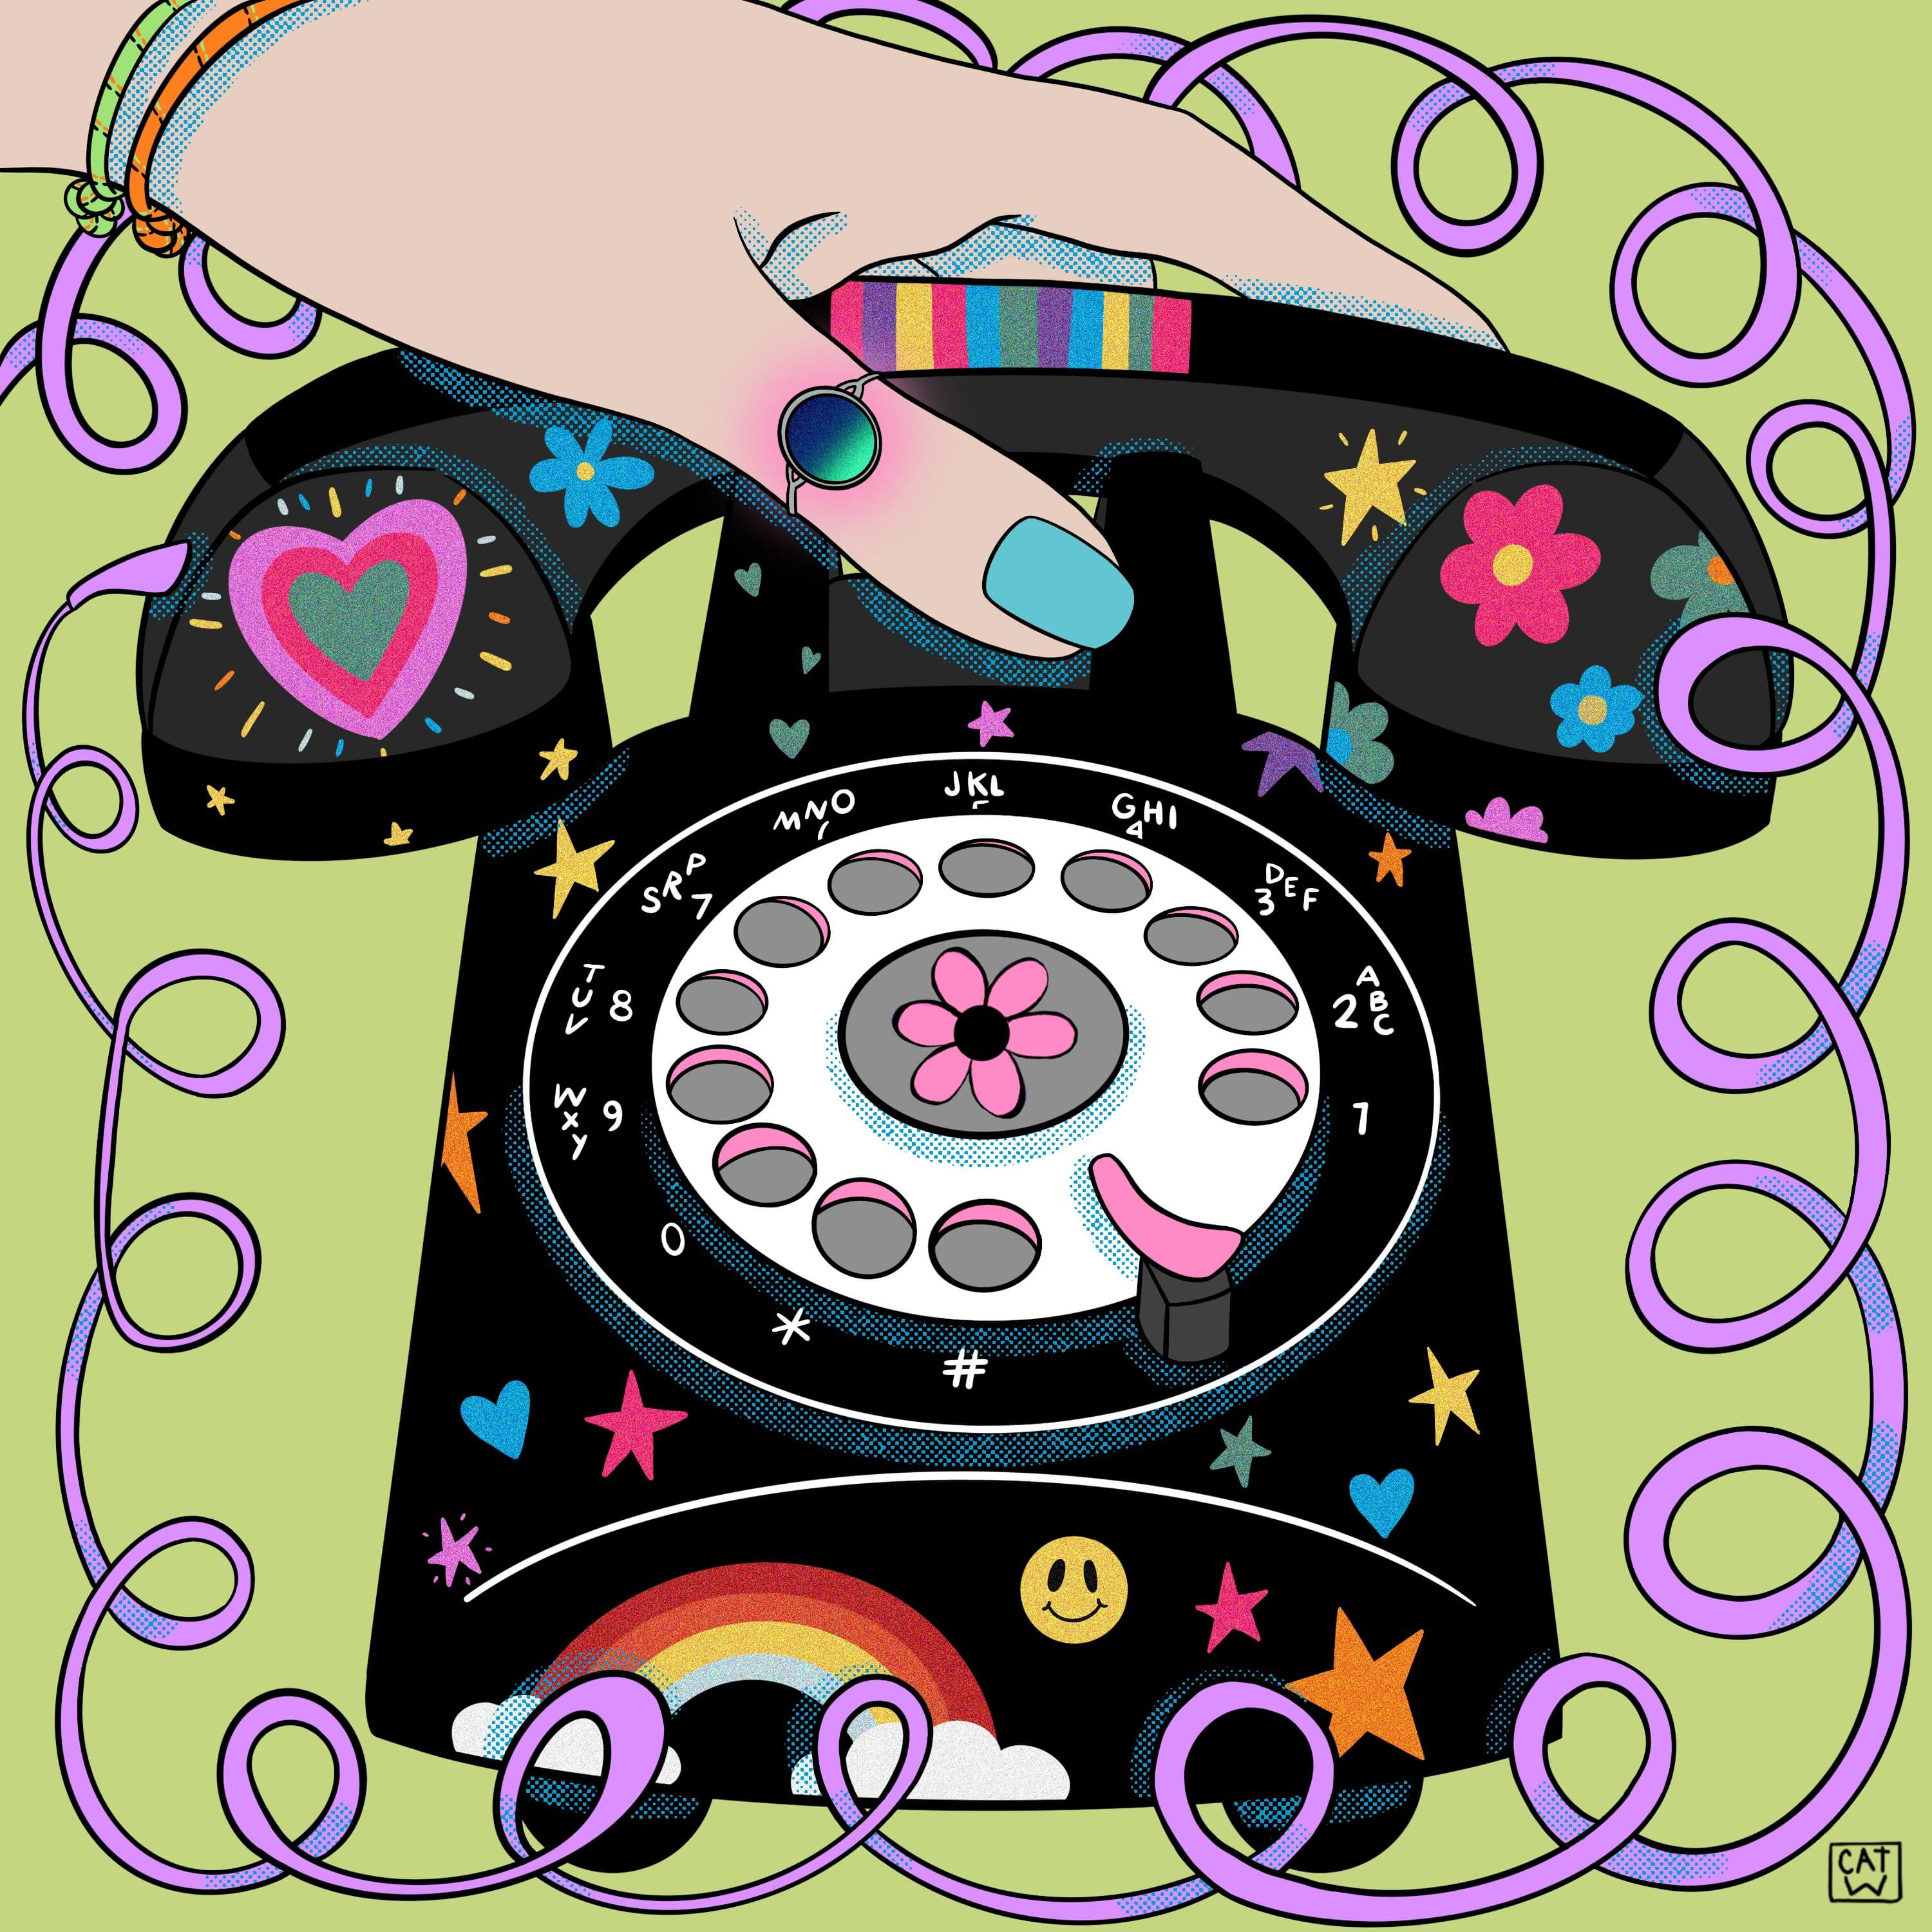 Black rotary phone with colorful stickers - How minimalism improves focus - Image 